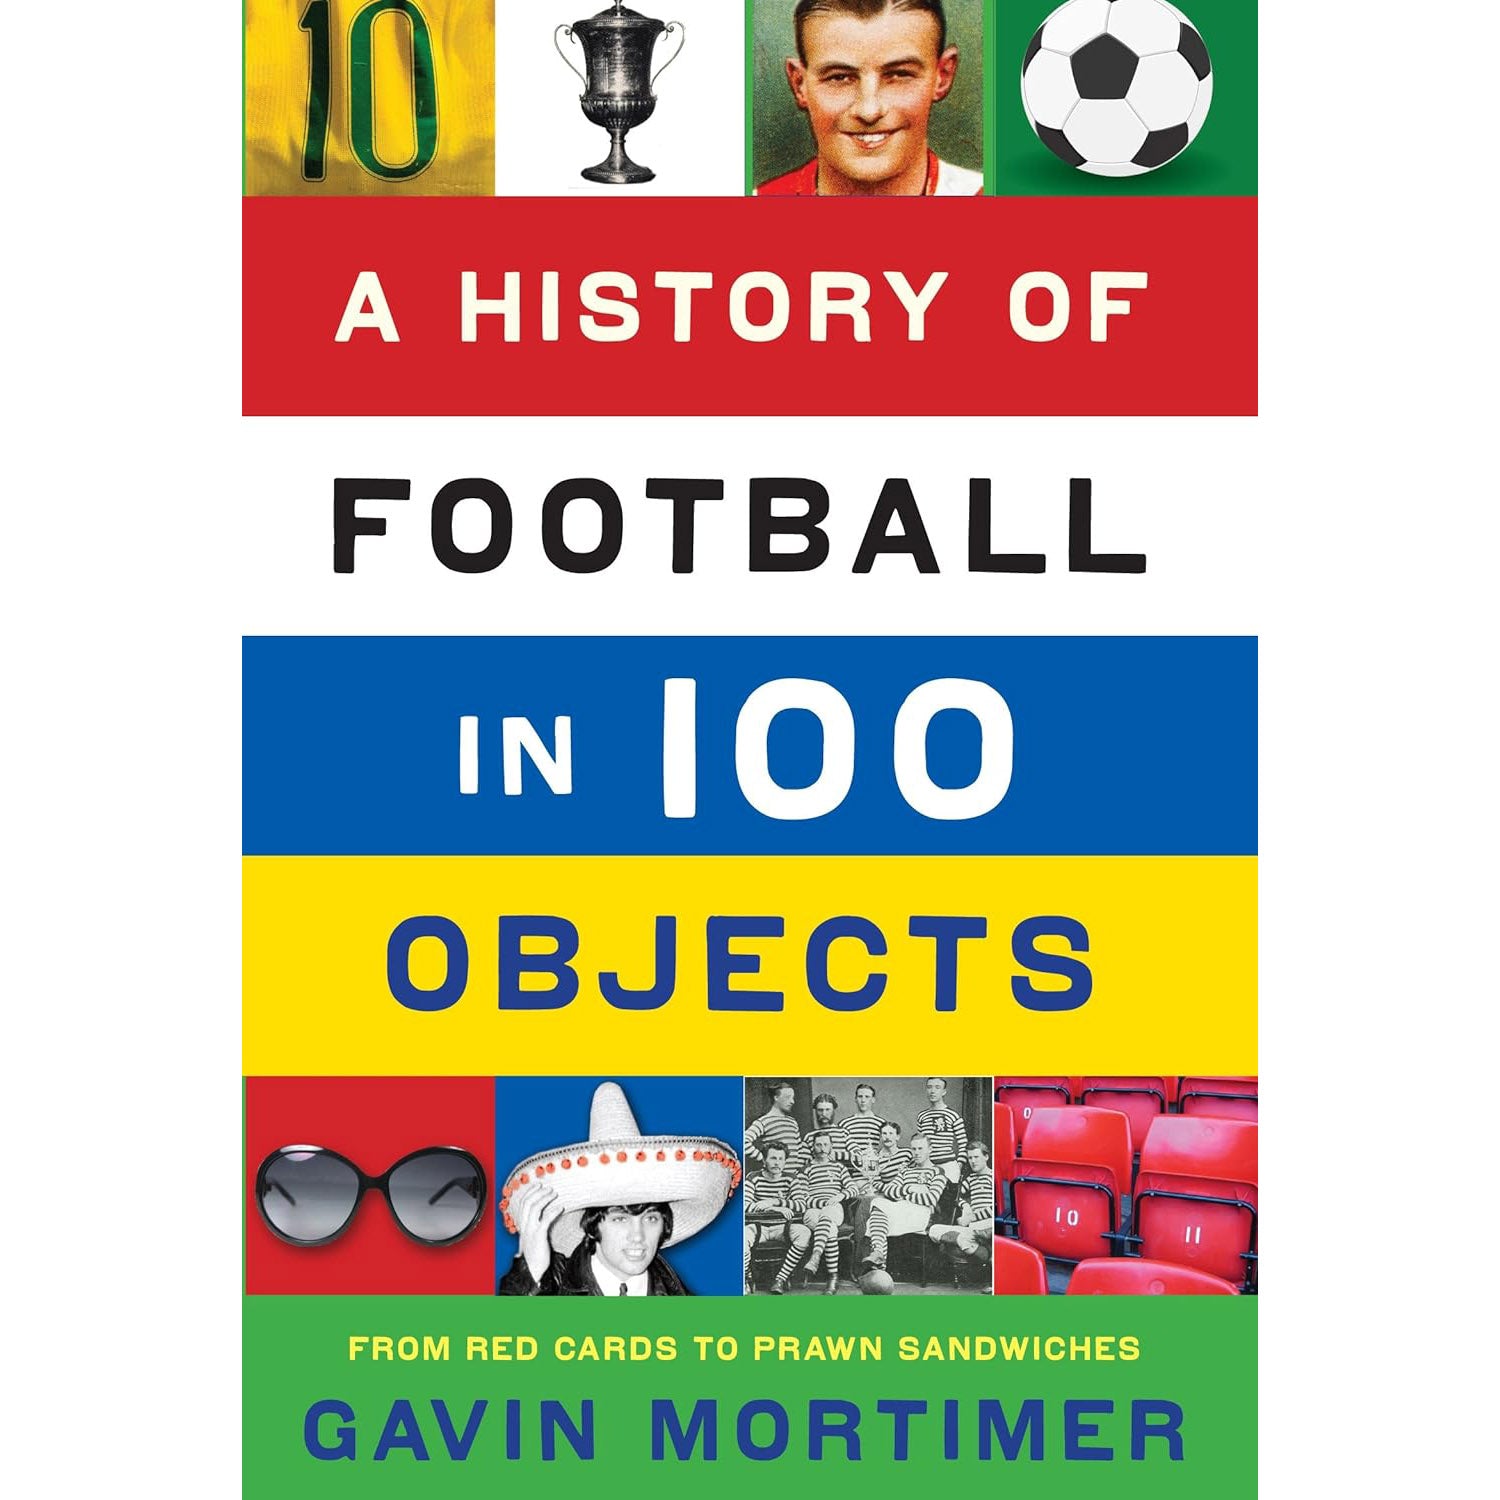 A History of Football in 100 Objects – From Red Cards to Prawn Sandwiches